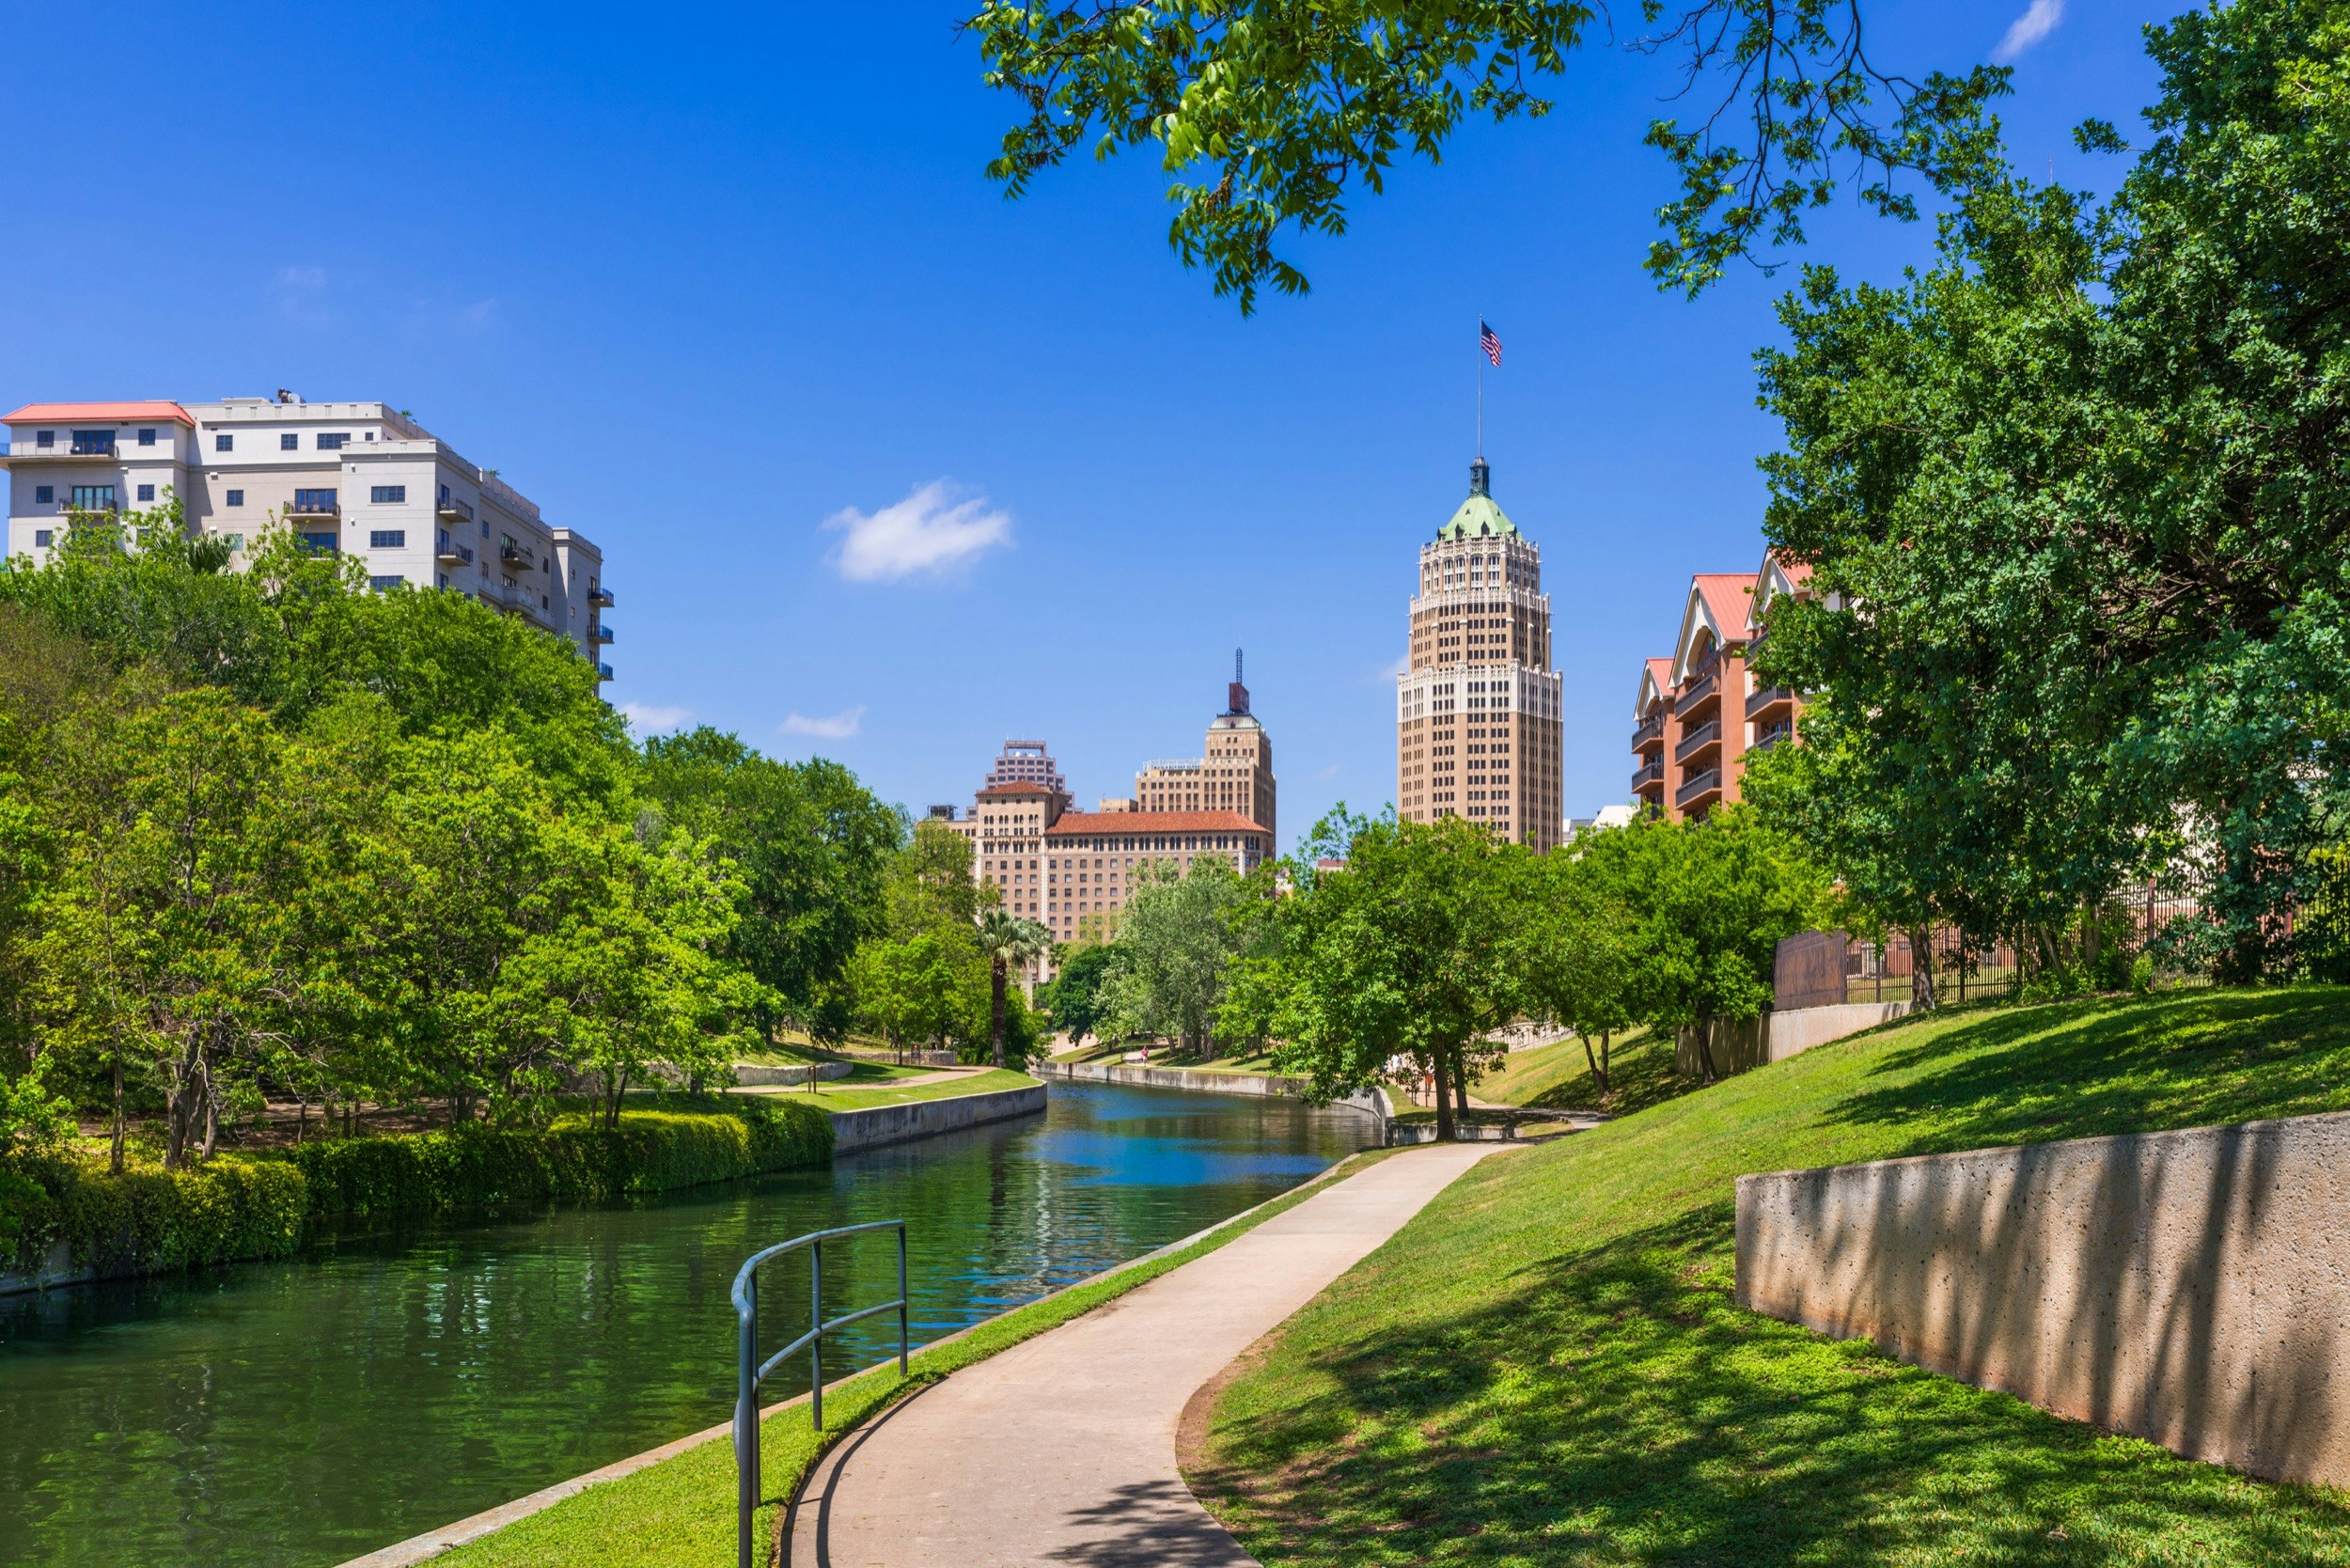 The San Antonio skyline rises above the river and manicured trails outside the downtown core